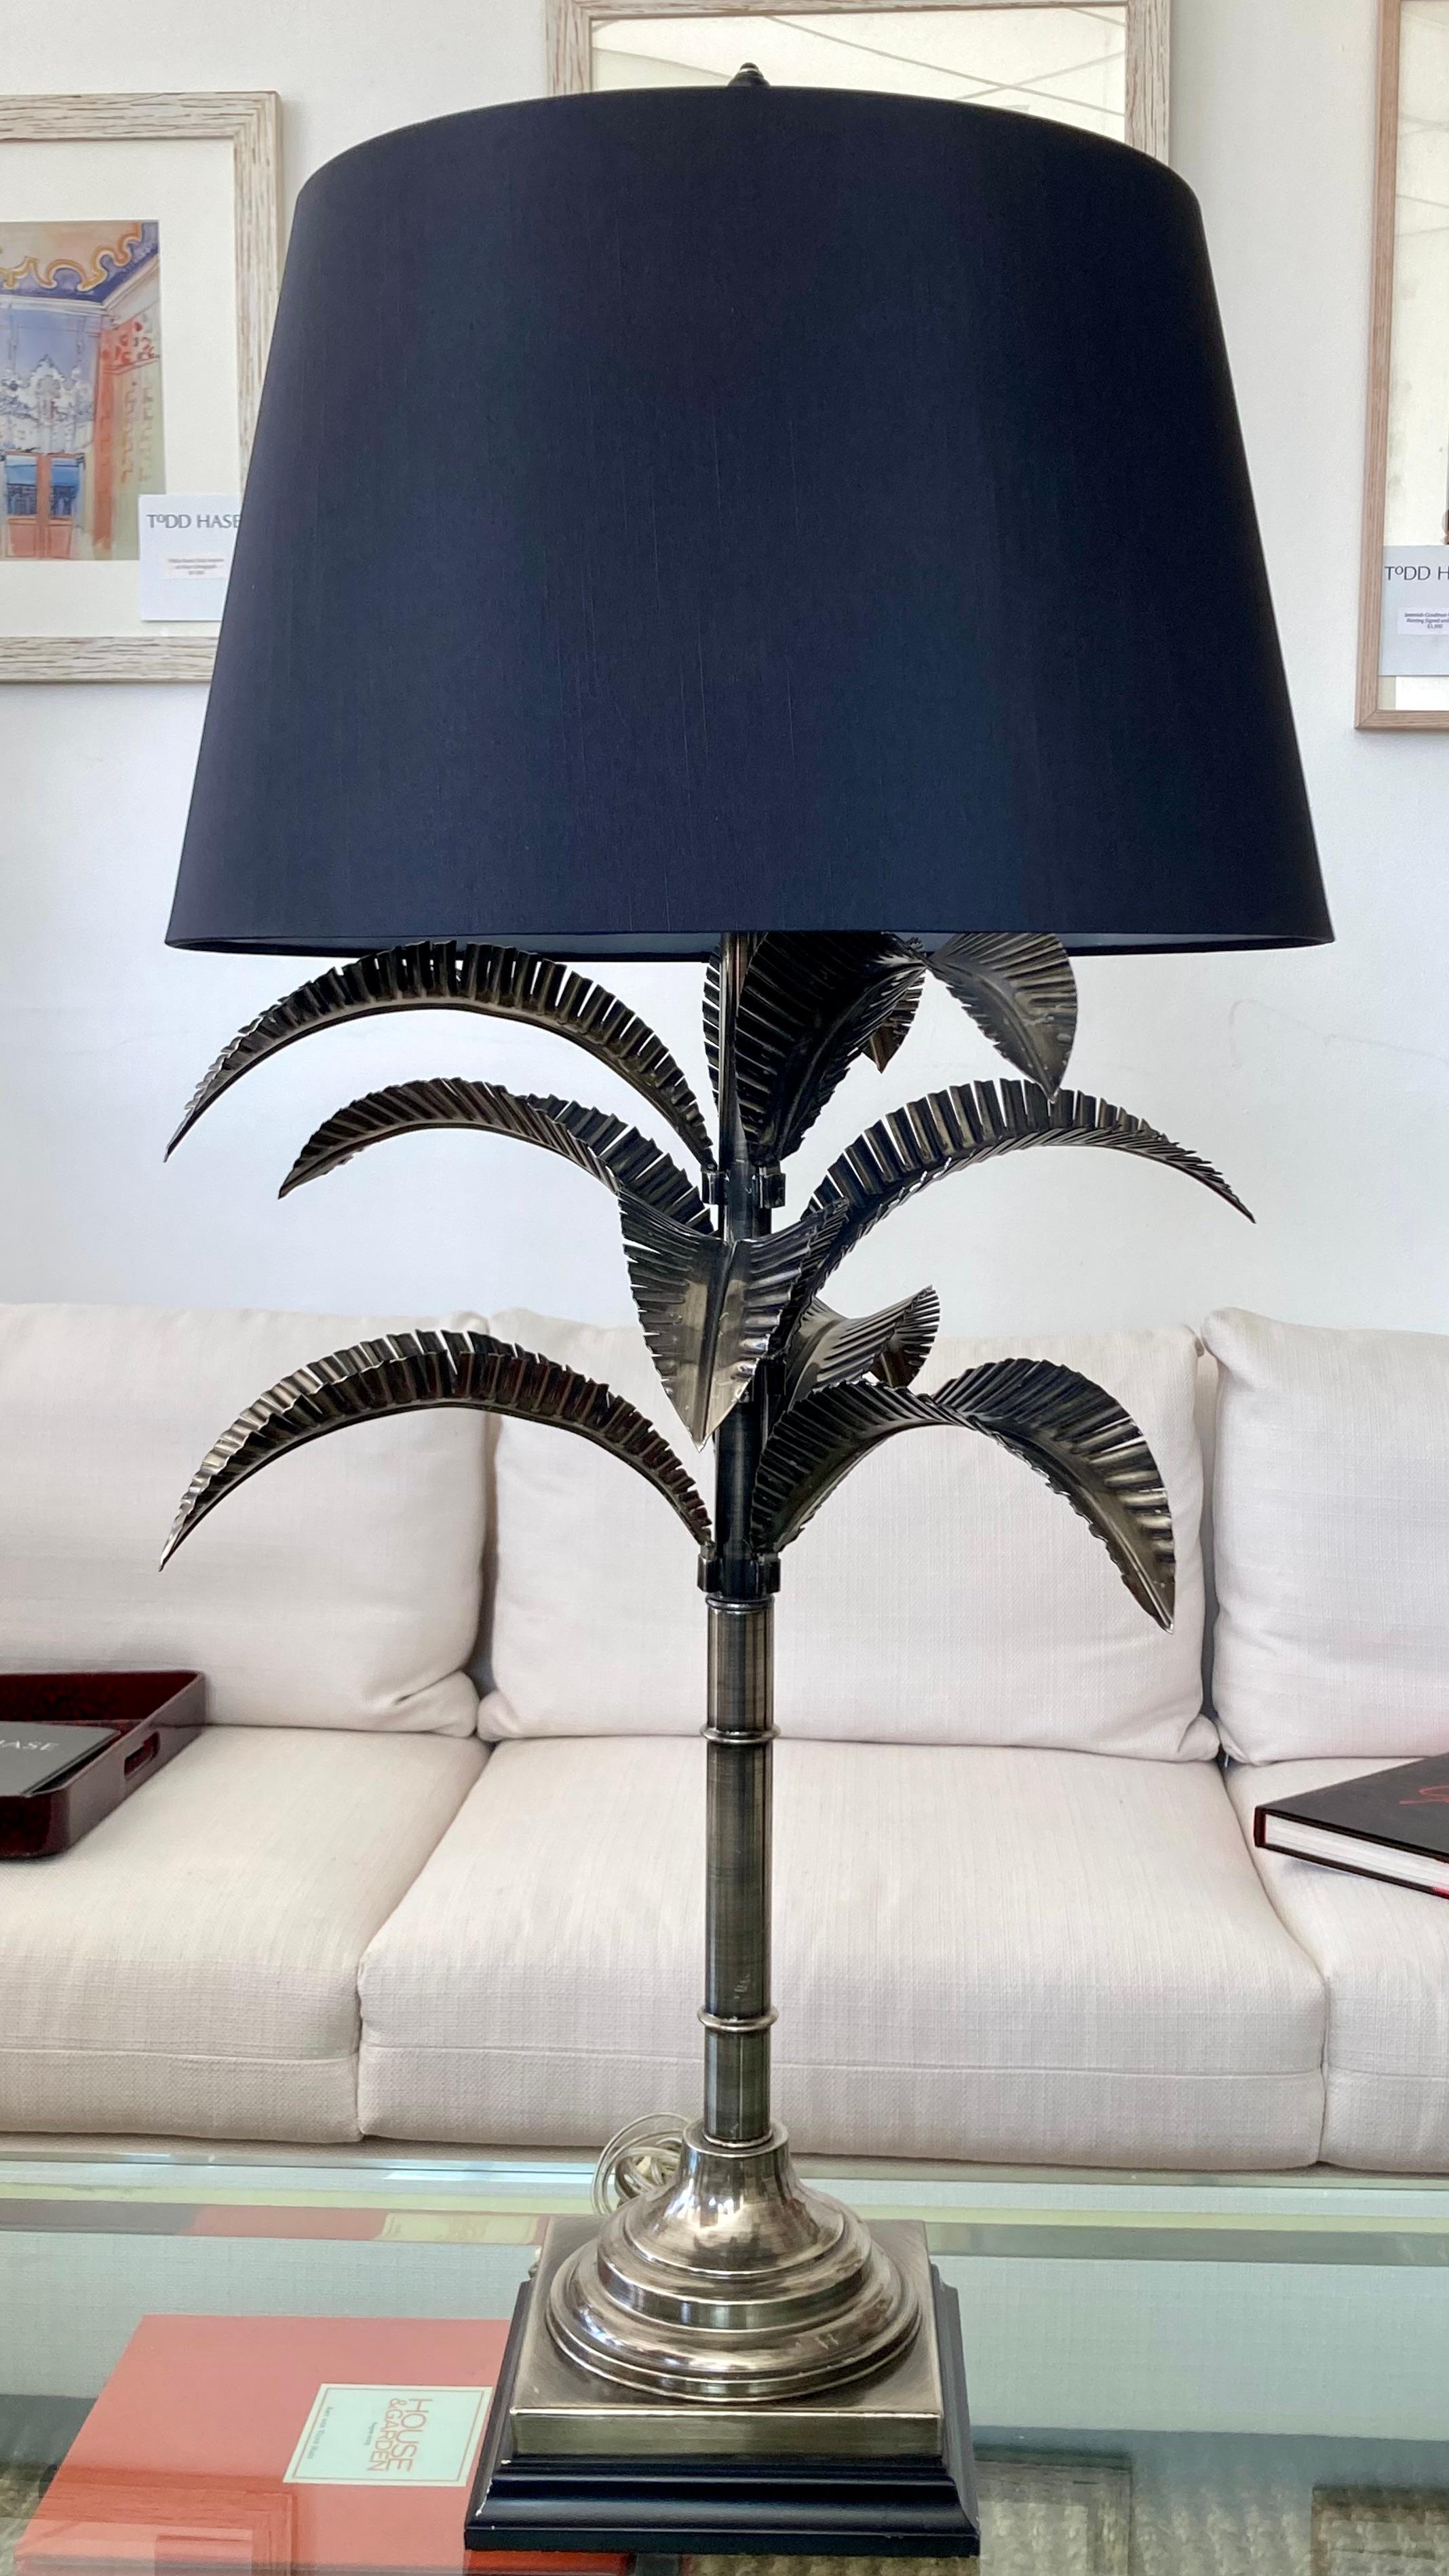 Beautiful classic Jansen metal palm tree table lamp with original finial and shade. Great addition to your Jansen inspired interiors and rooms.